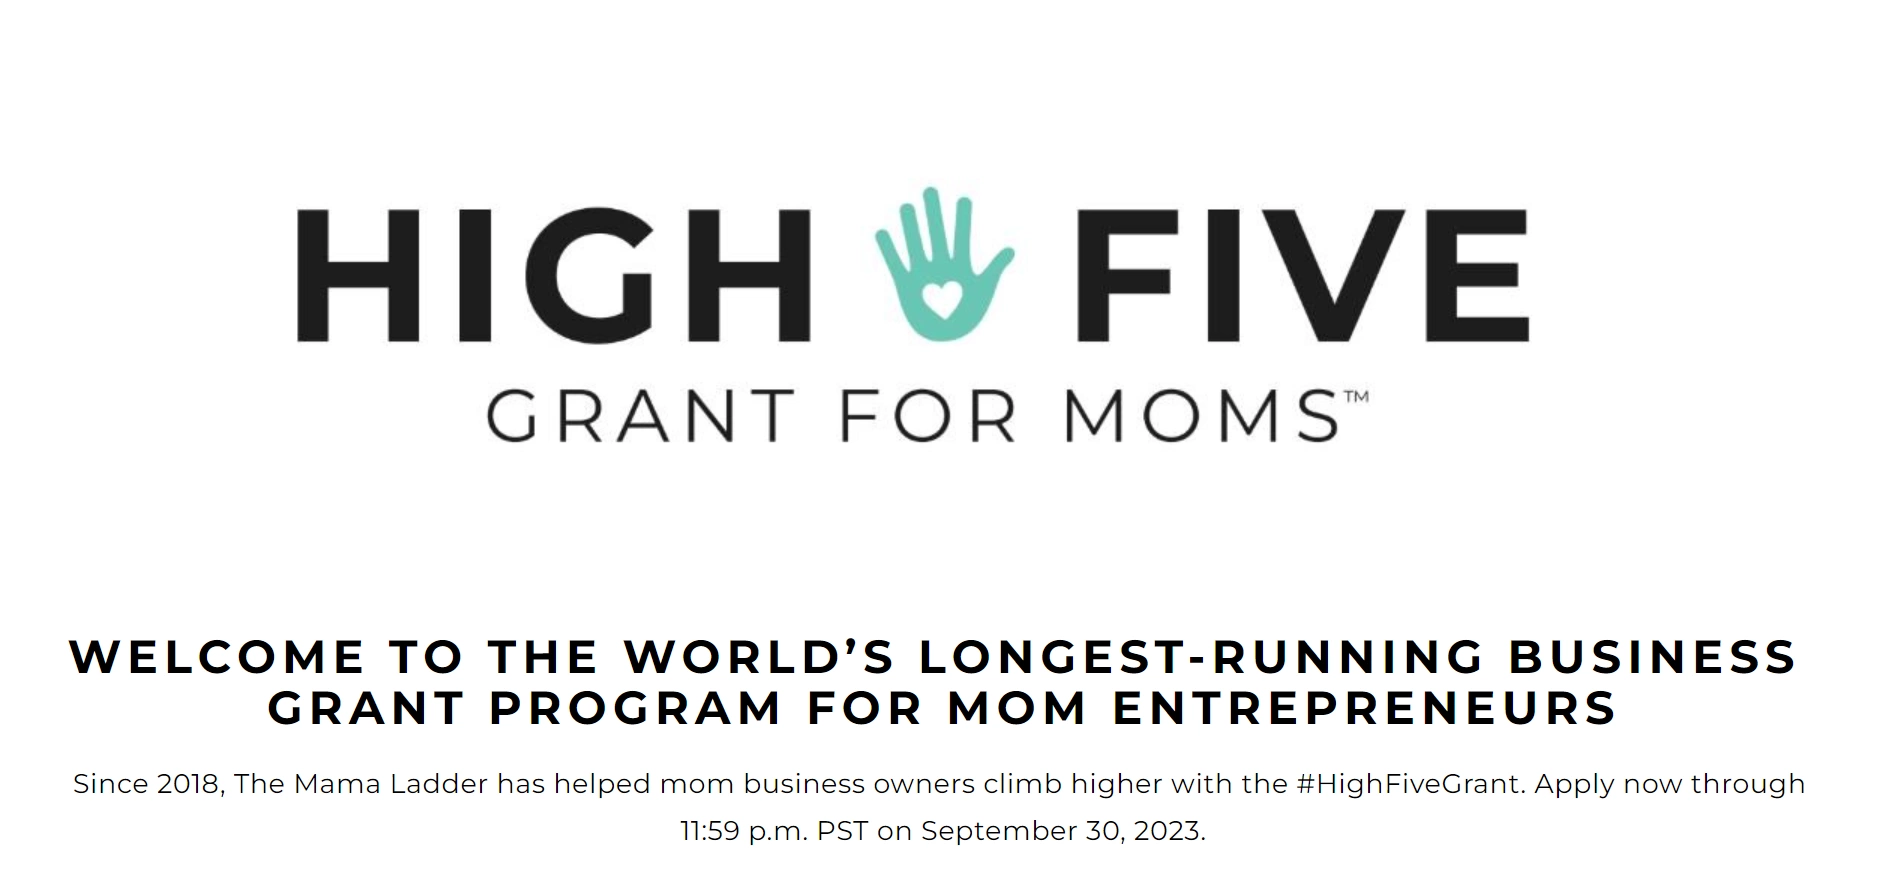 High Five Grant homepage - Small business grants for women